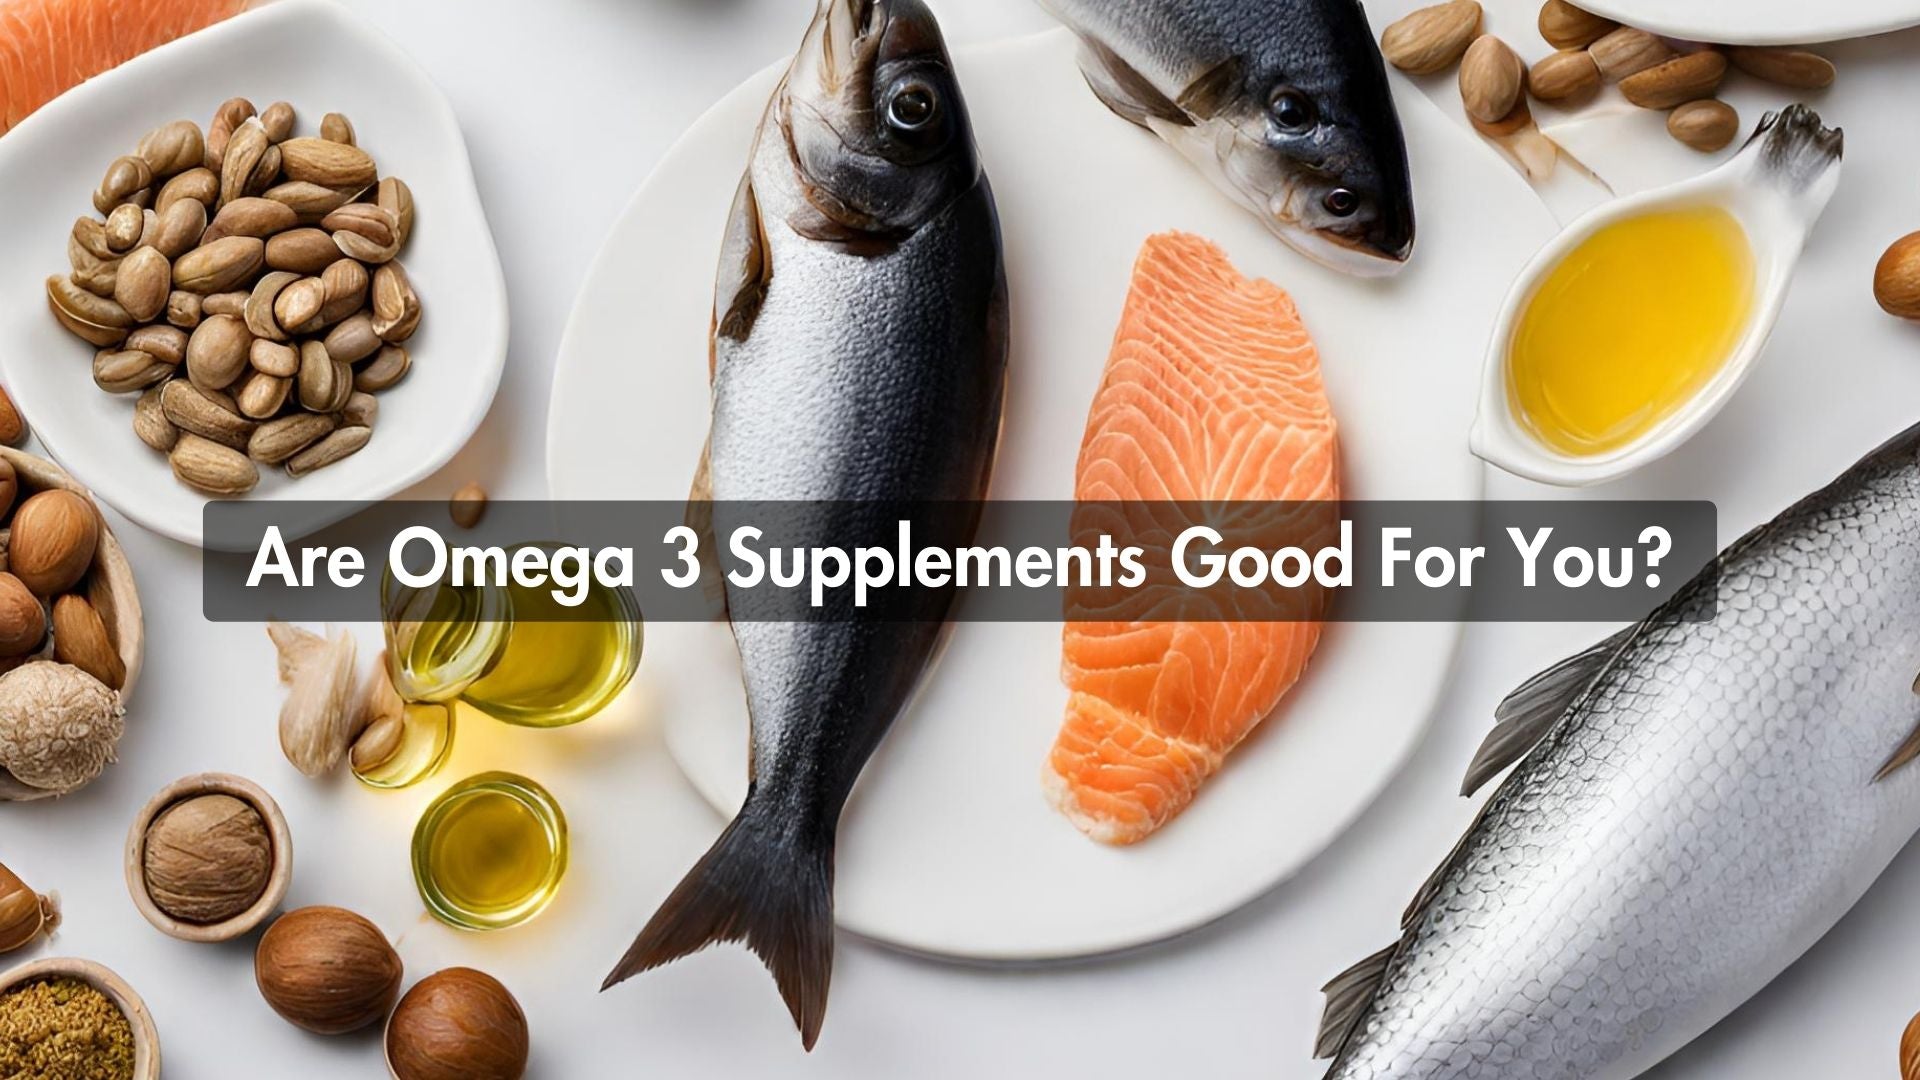 Are Omega 3 Supplements Good For You